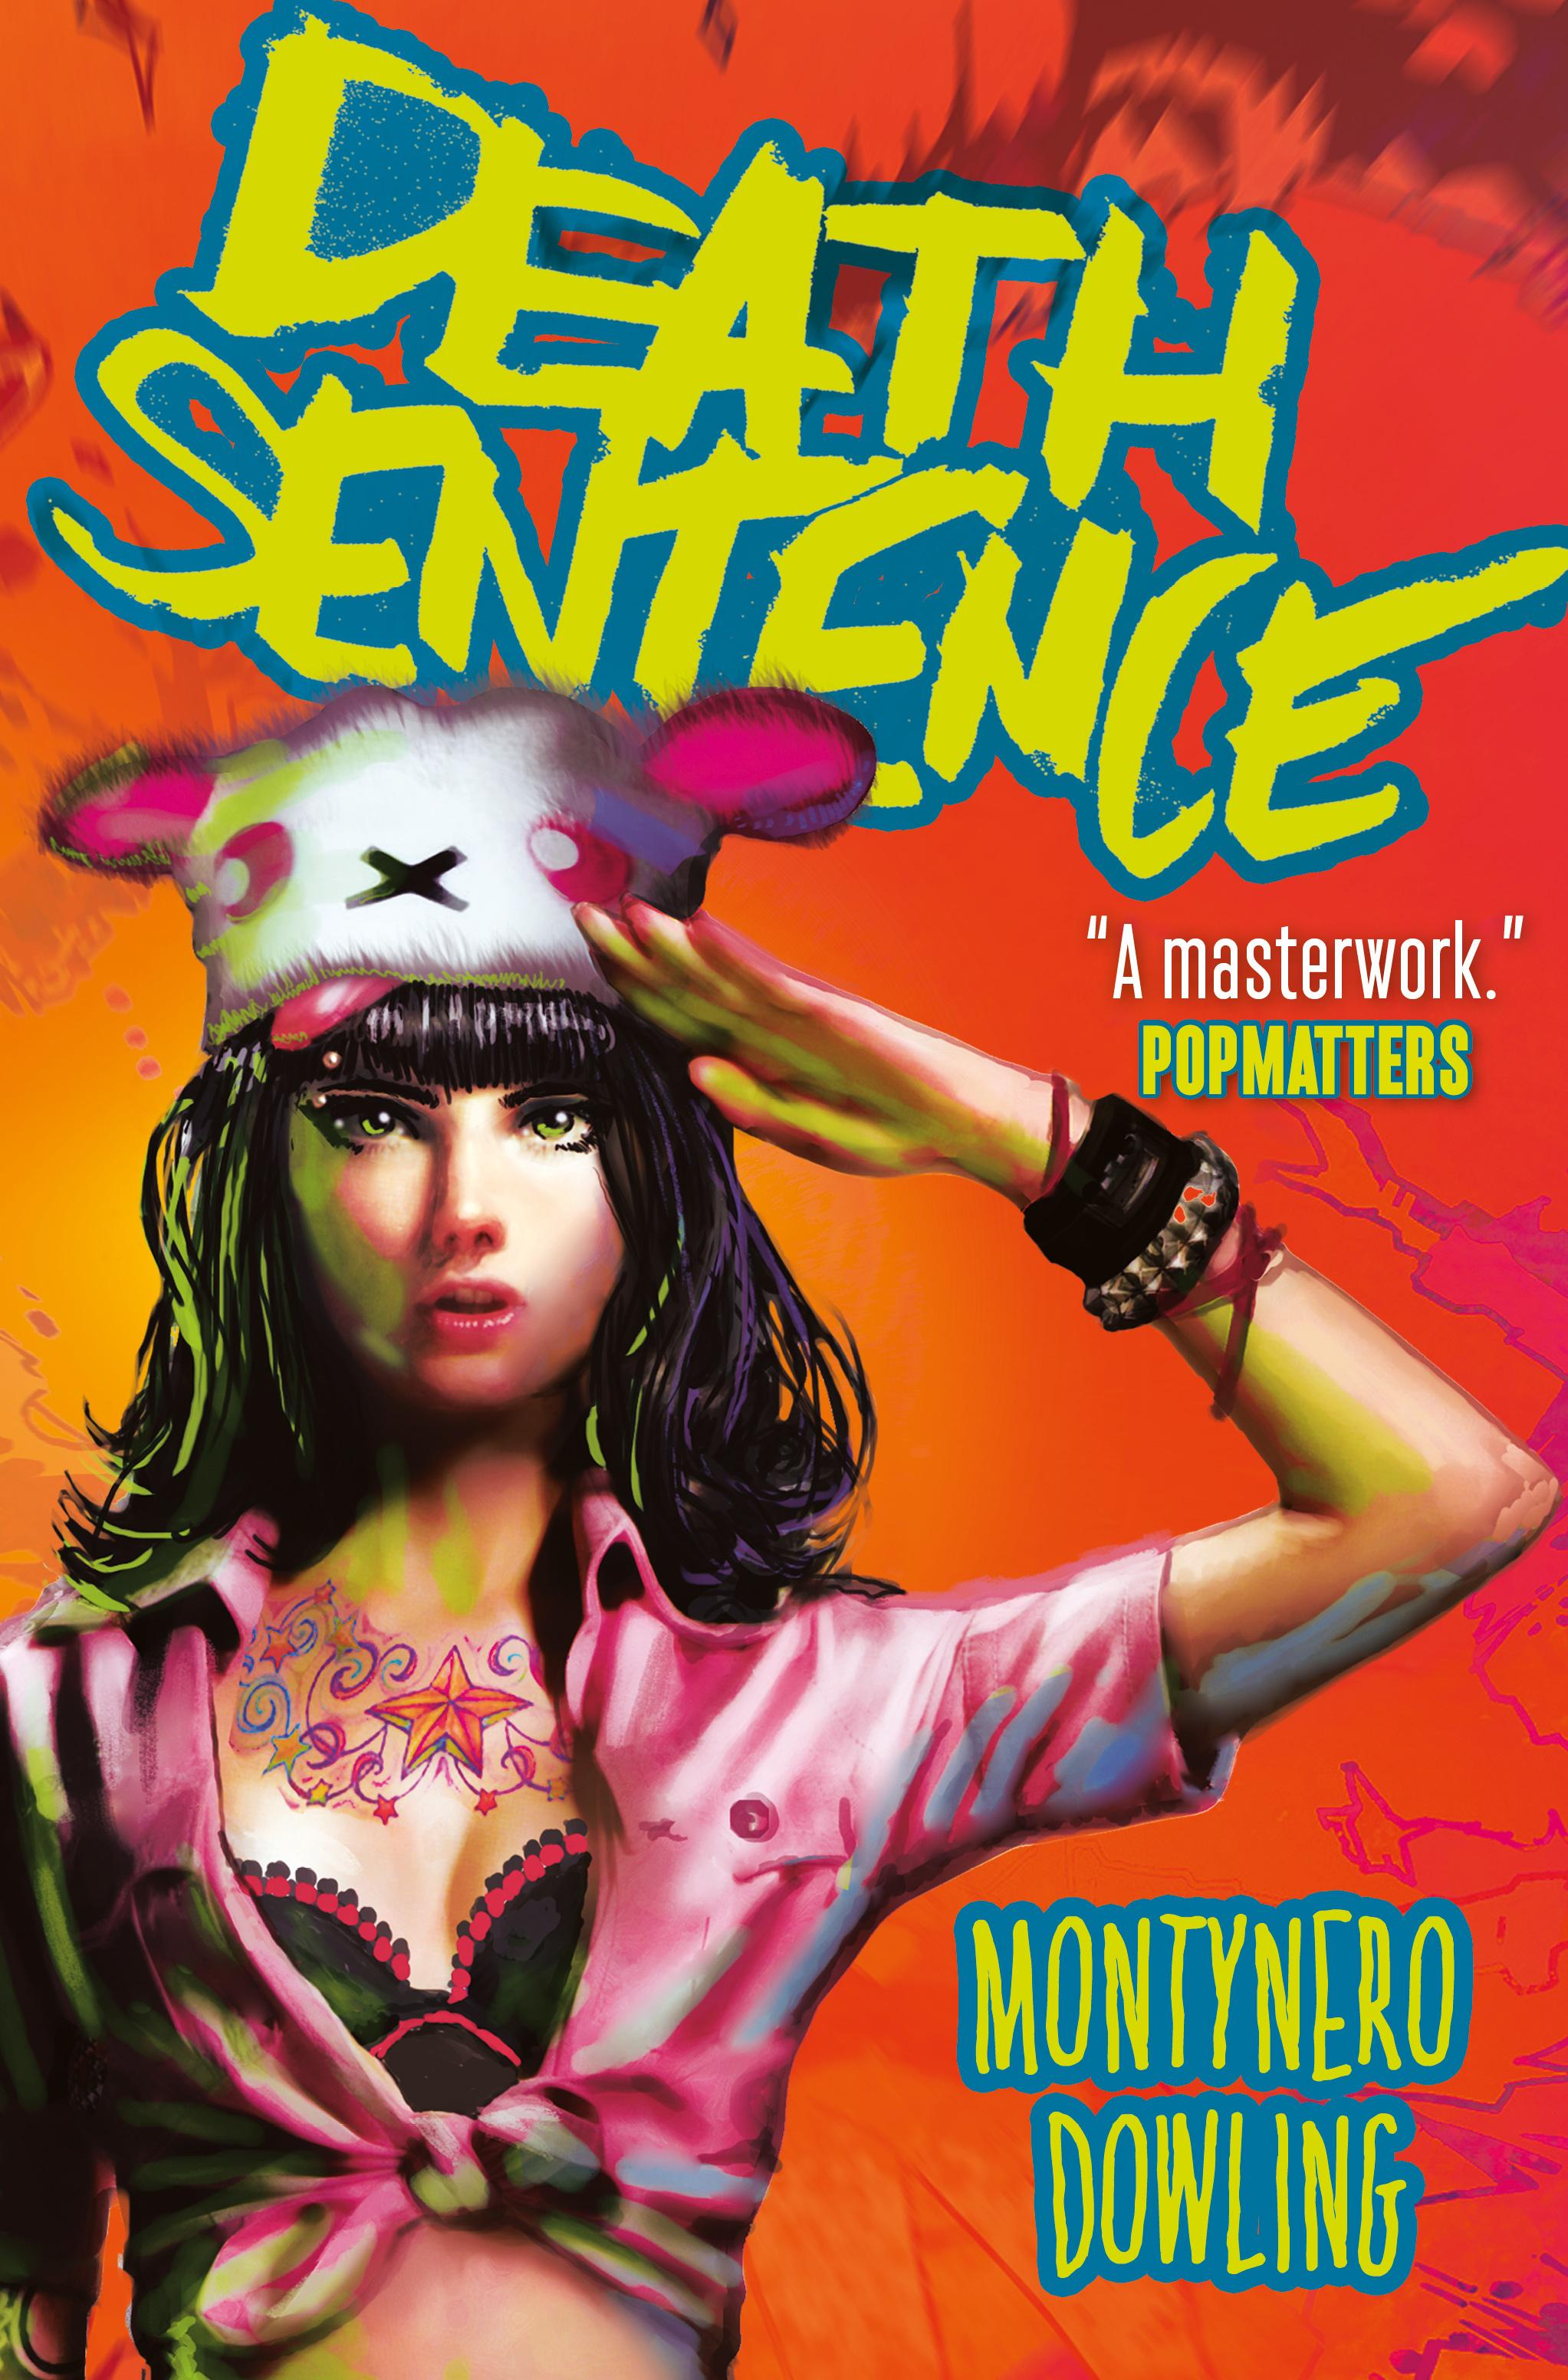 DeathSentence_Collection_Cover_RGB